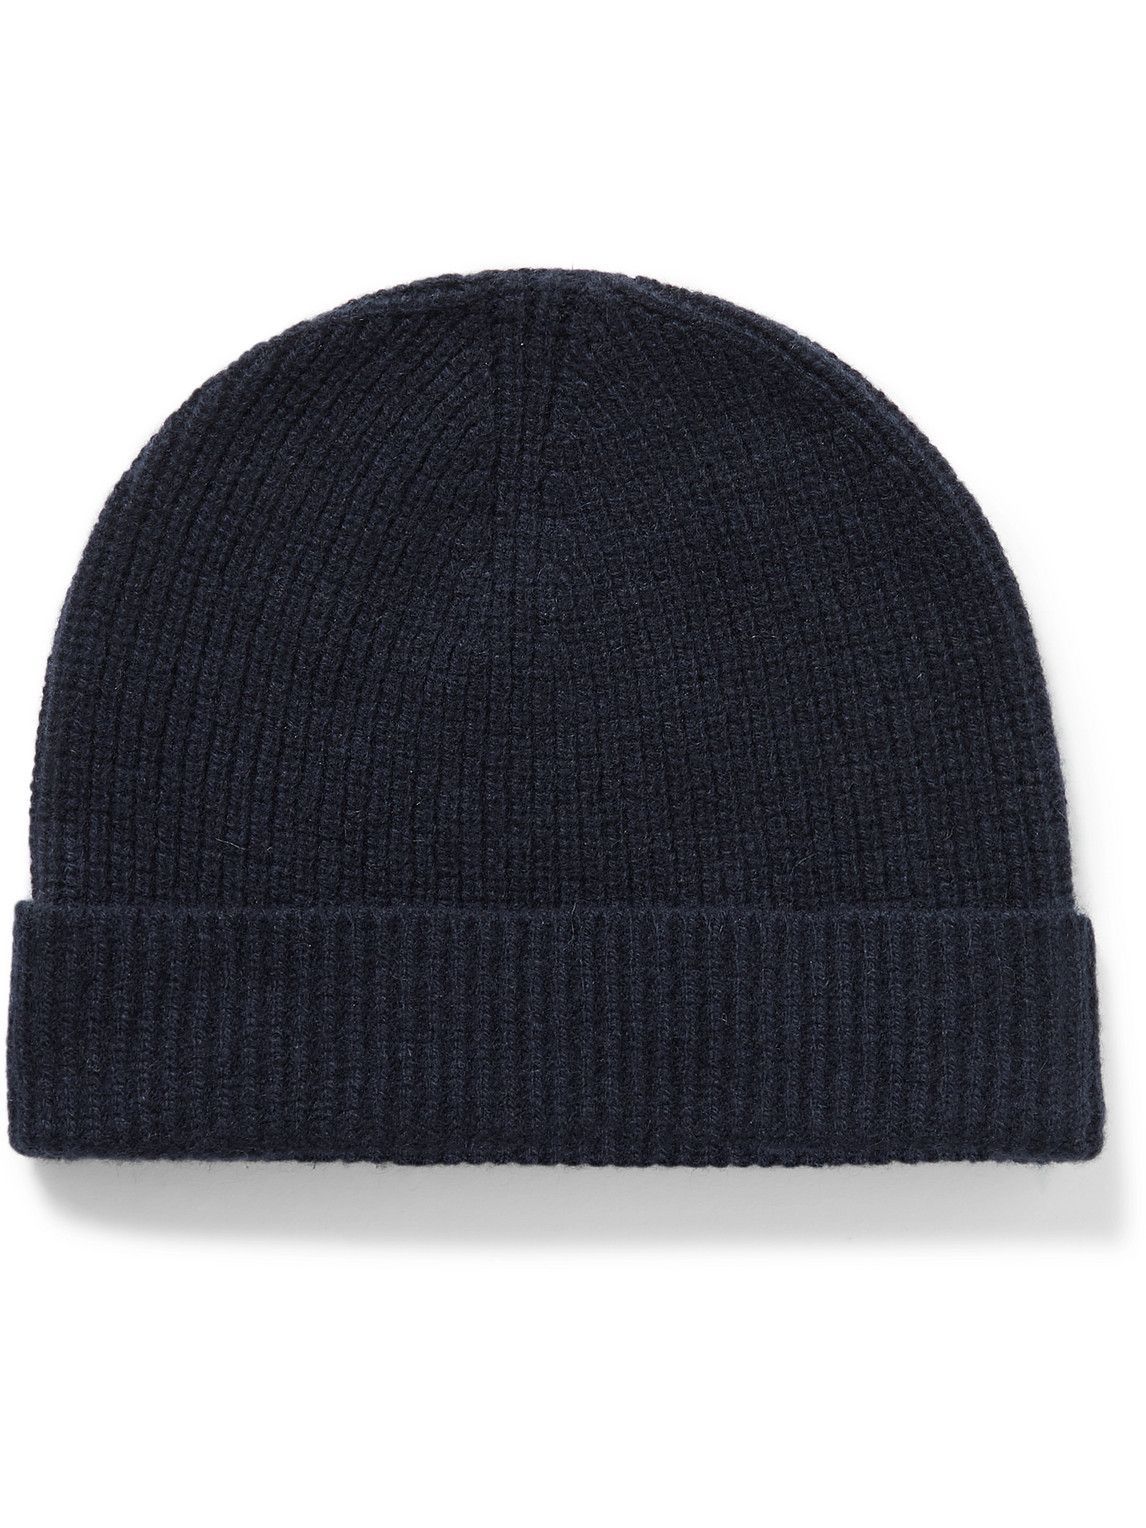 Sunspel - Ribbed Recycled Cashmere Beanie Sunspel